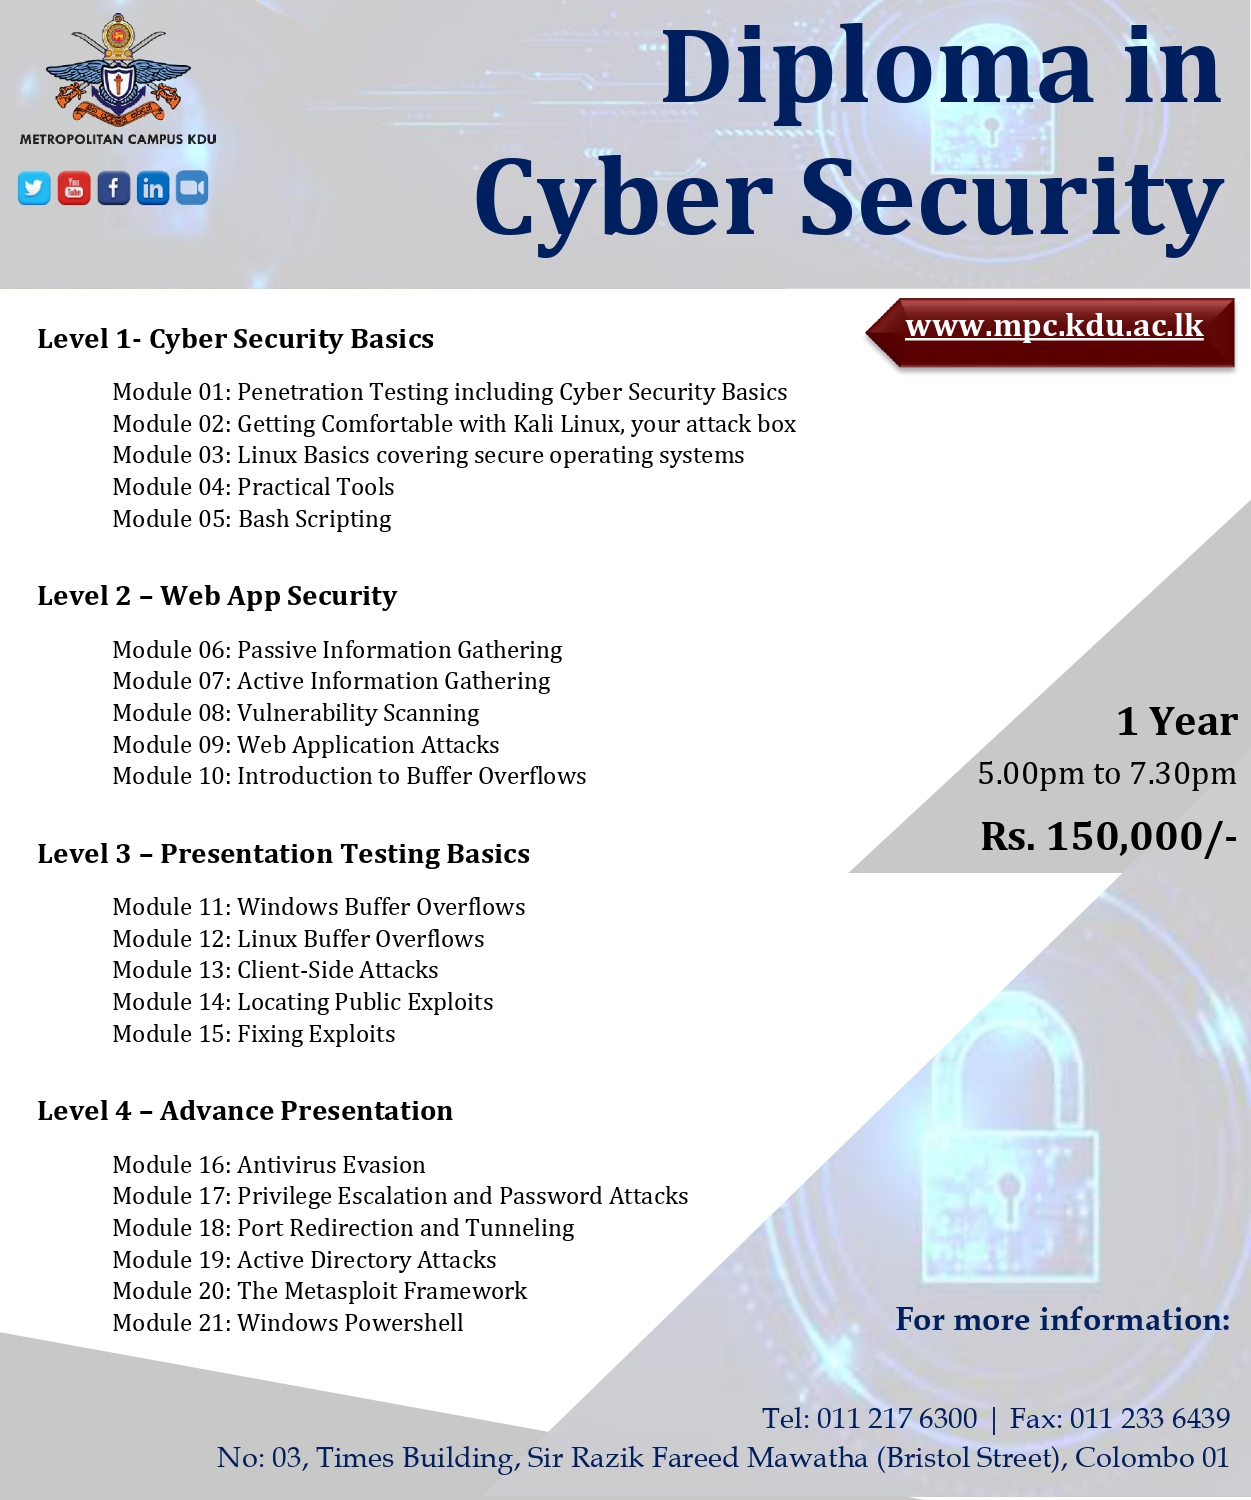 Diploma in Cyber Security (DICS)